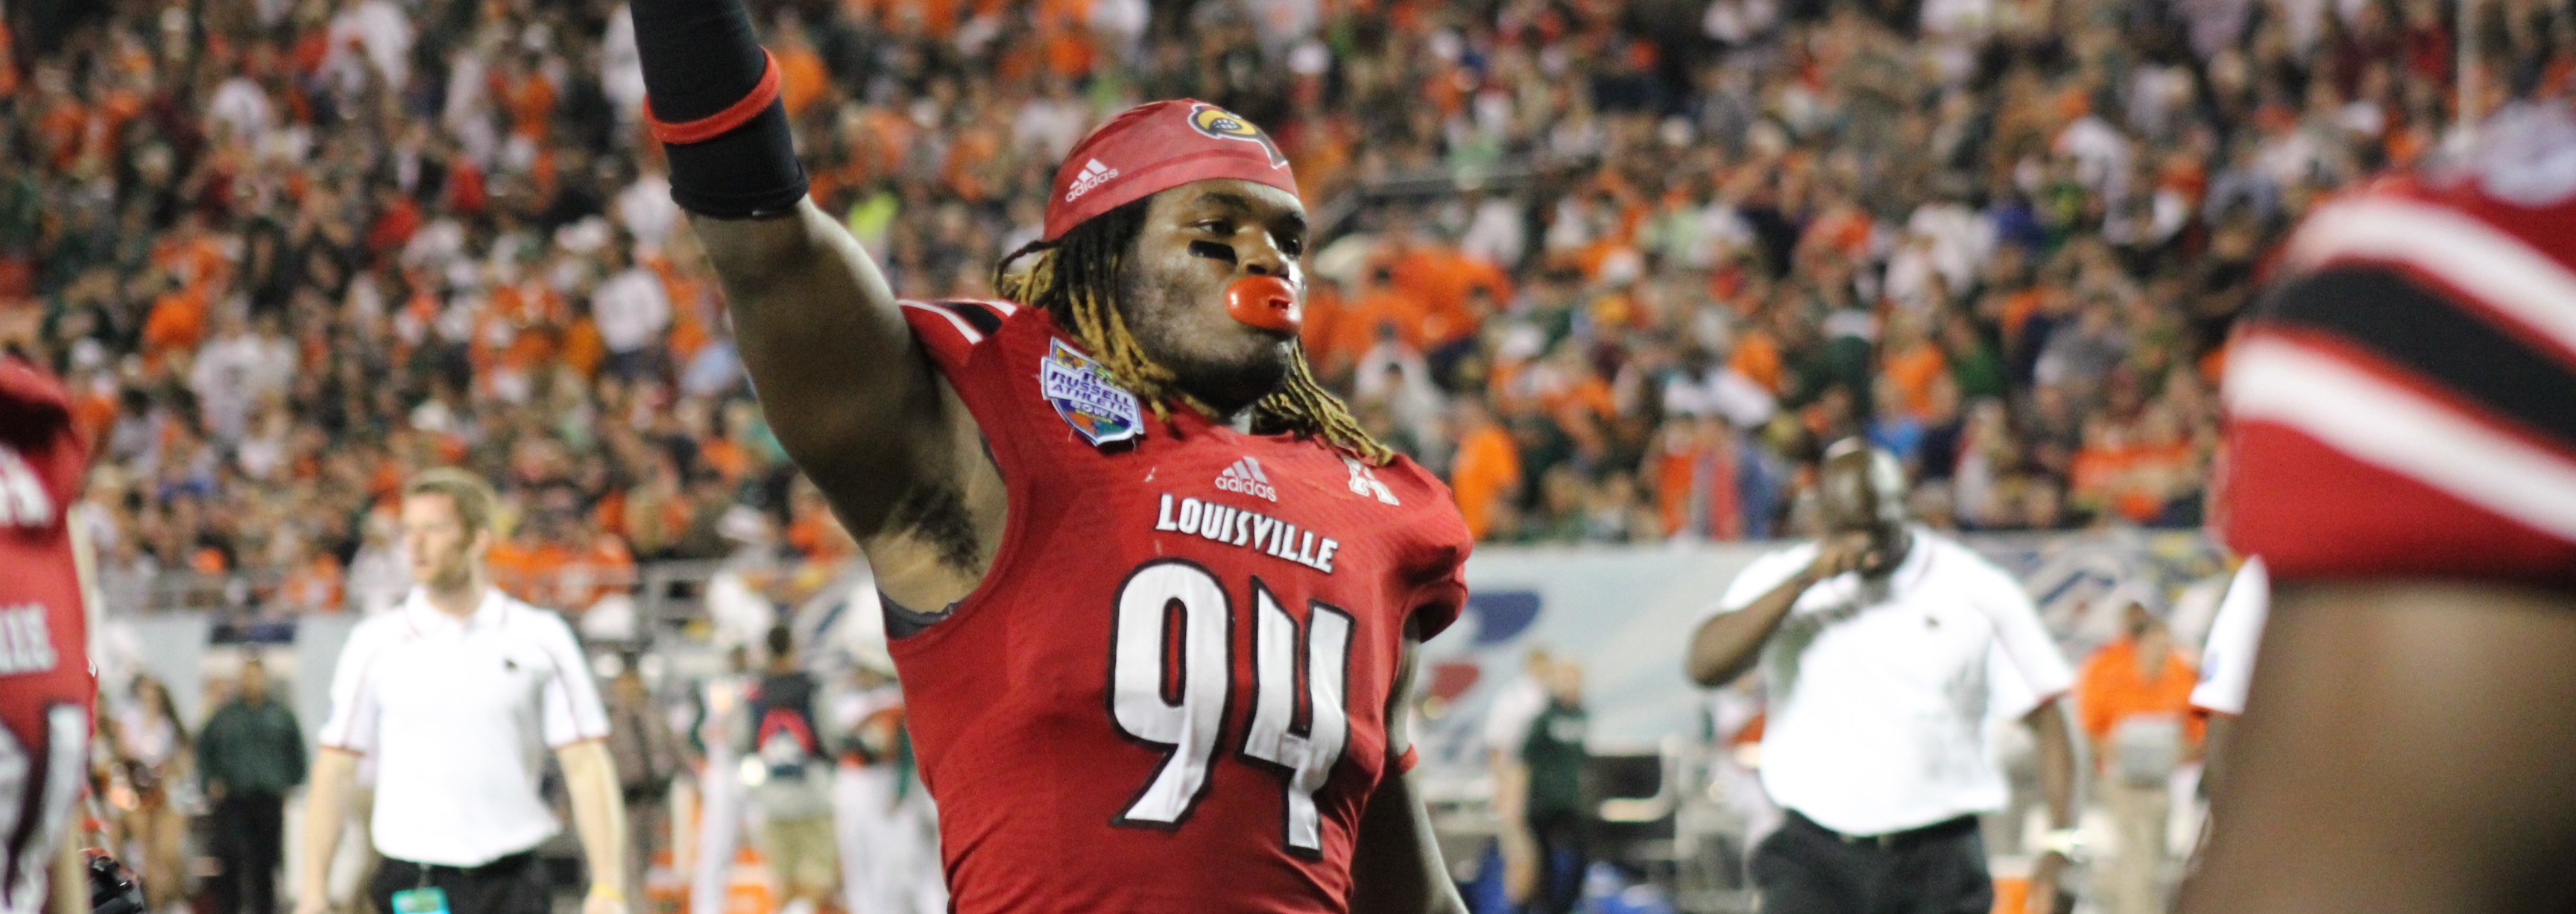 Lorenzo Mauldin Russell Athletic Bowl 2013 Louisville vs. Miami Photo By Mark Blankenbaker Fitted